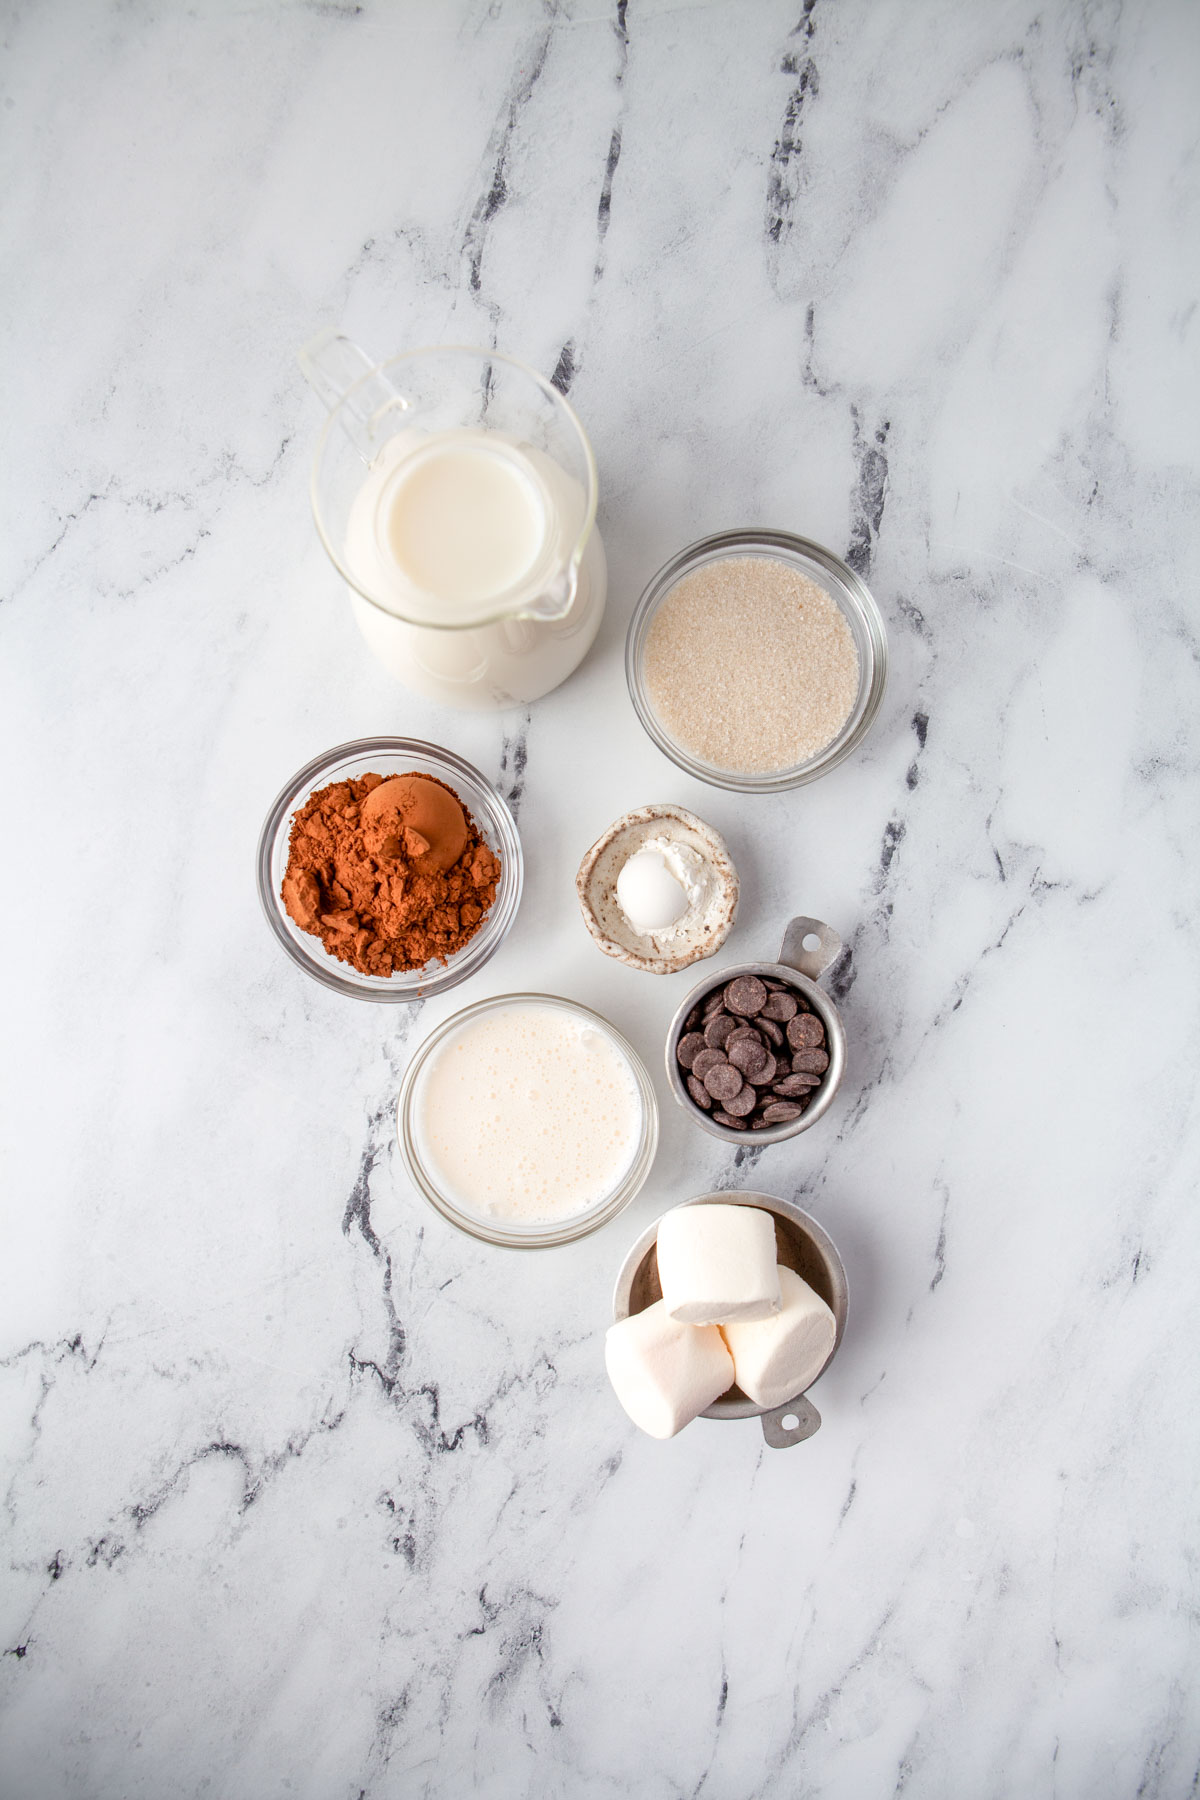 hot chocolate ingredients on a marble countertop